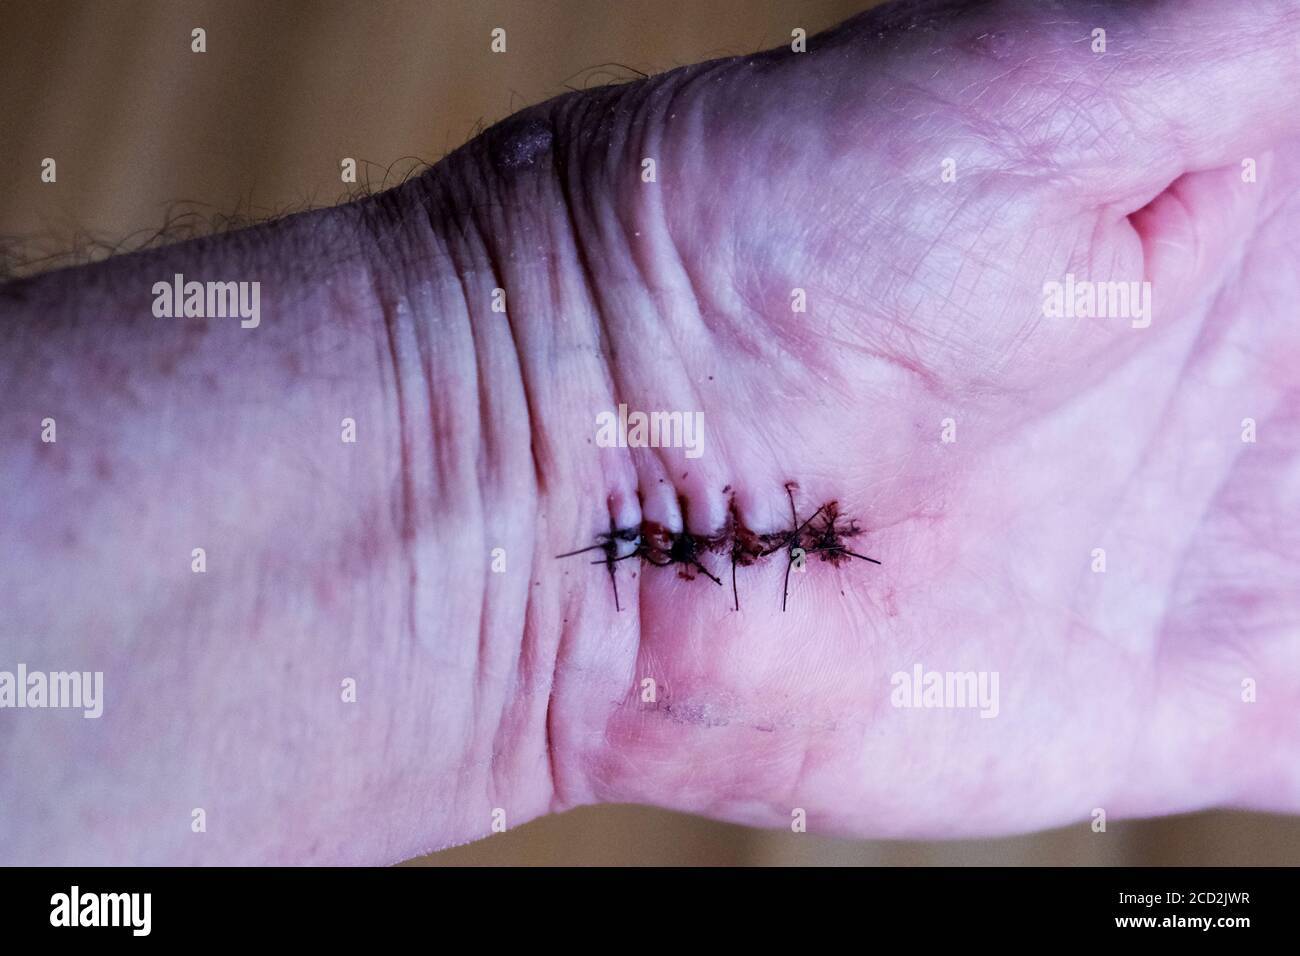 Stitches in a hand after a carpal tunnel operation Stock Photo